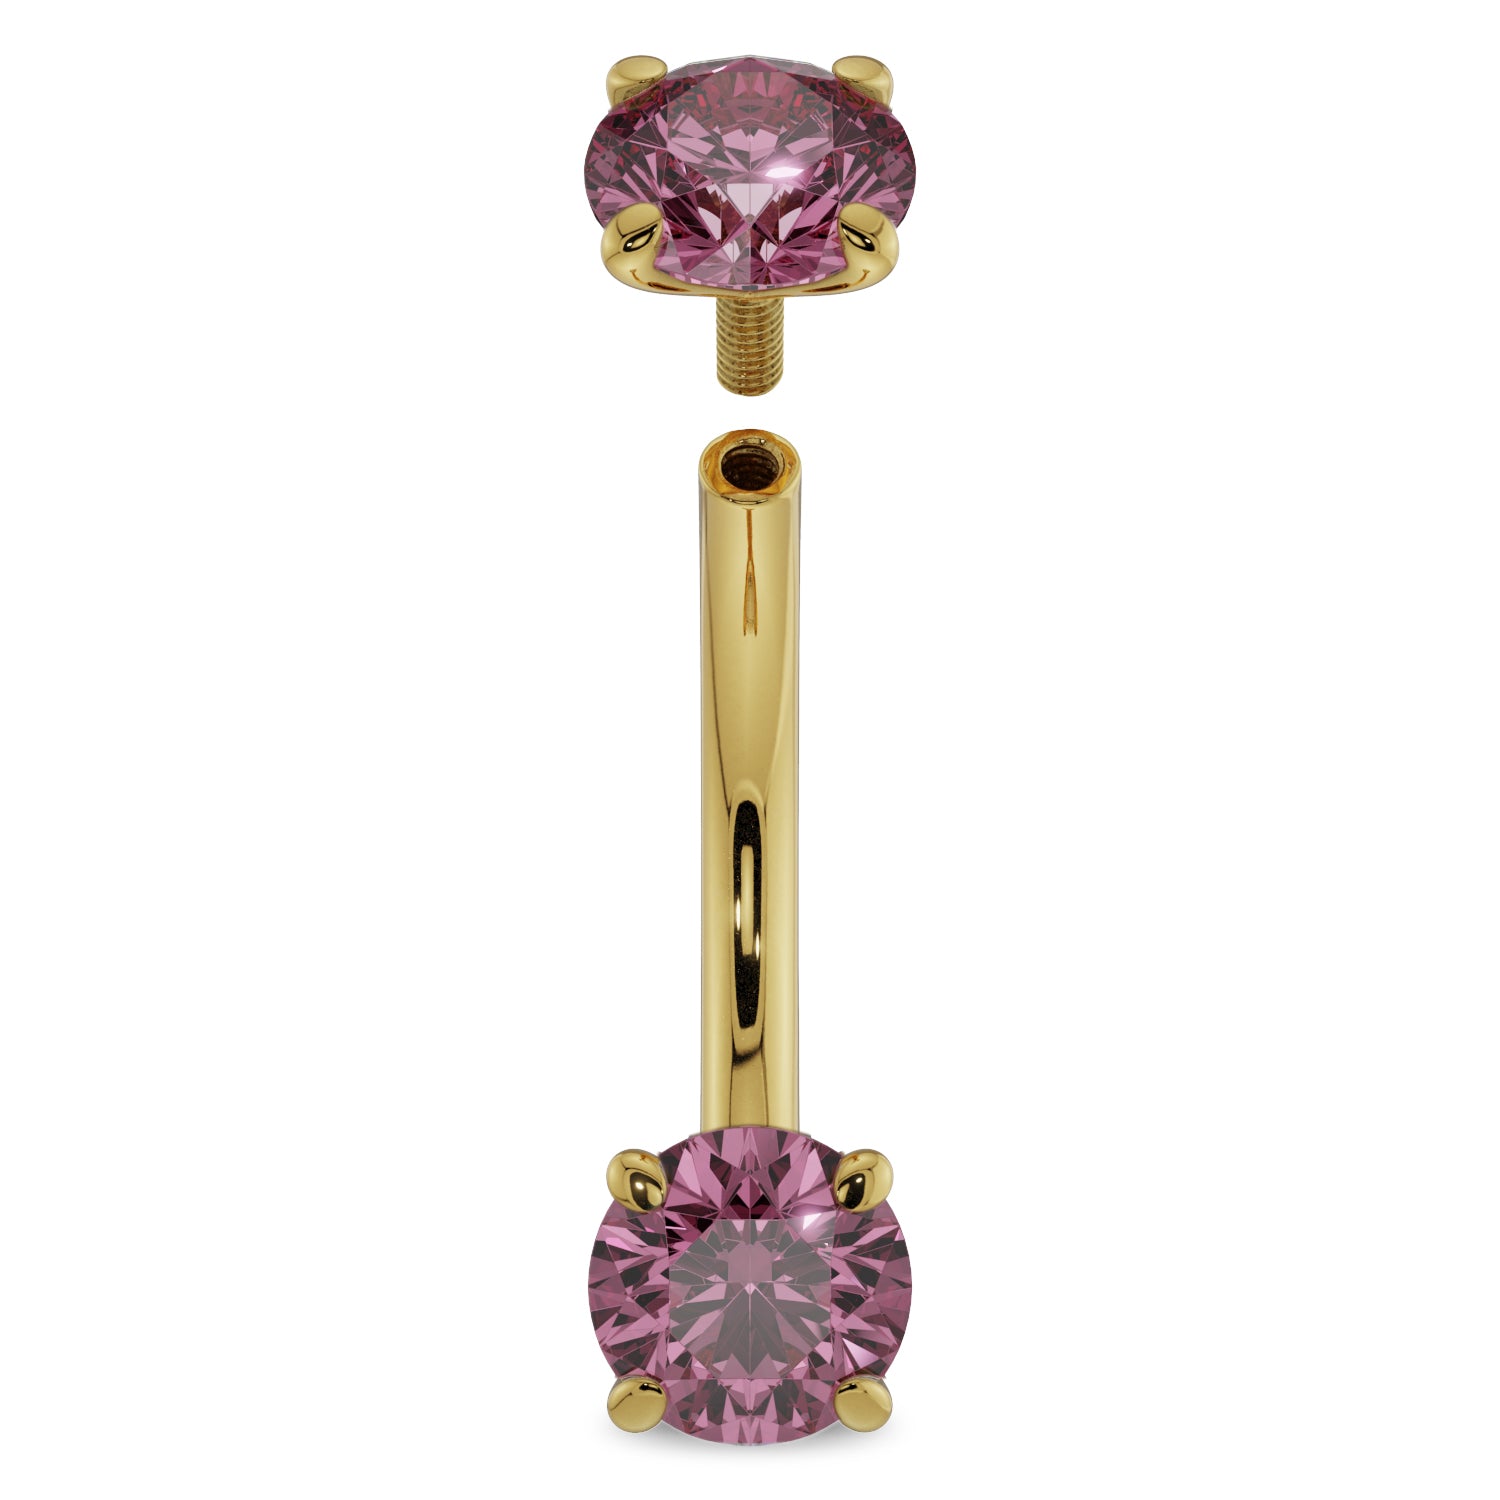 Internally threaded Gold Pink Sapphire Prong-Set Eyebrow Rook Belly Curved Barbell